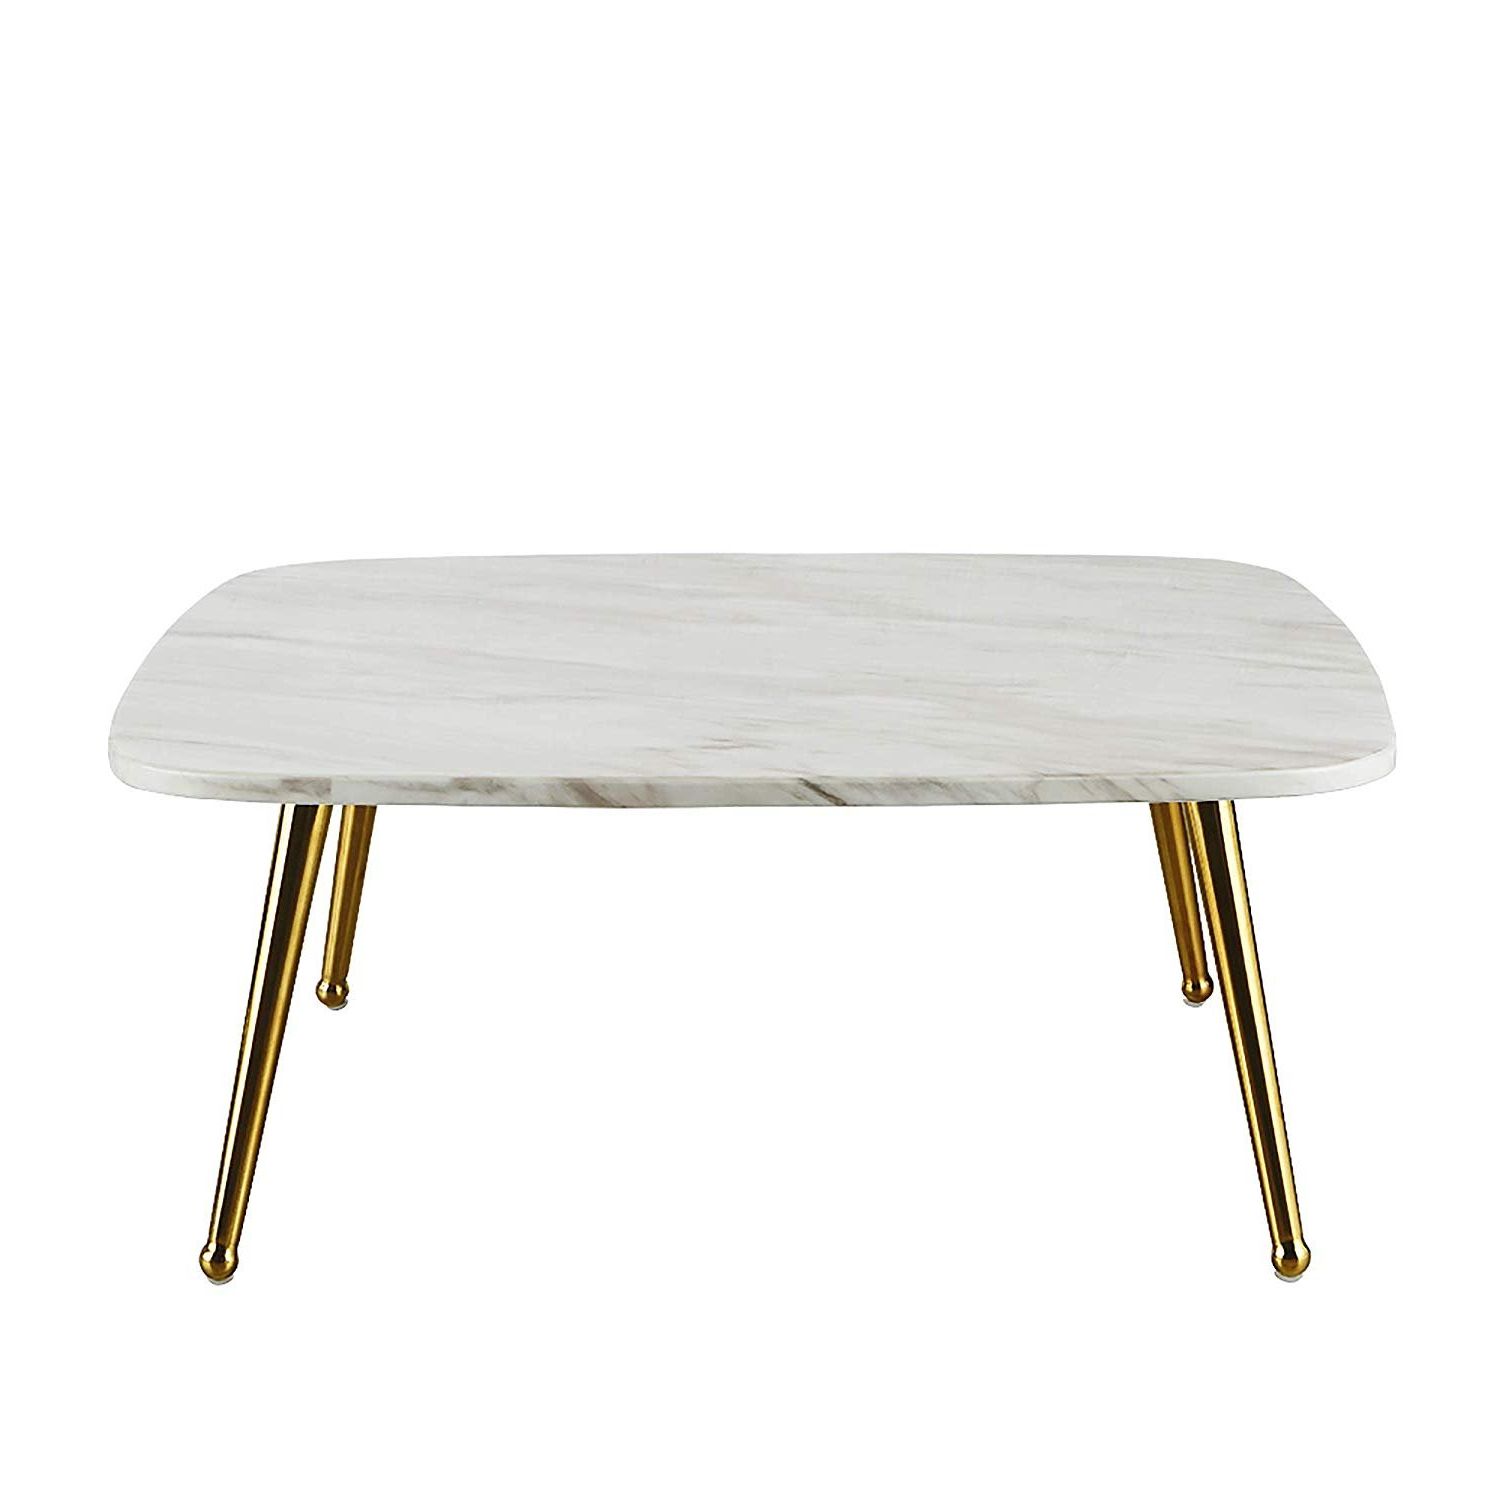 Modern Mid Century Coffee Table With Marble Print And Gold With Regard To Preferred White Marble Gold Metal Coffee Tables (View 4 of 20)